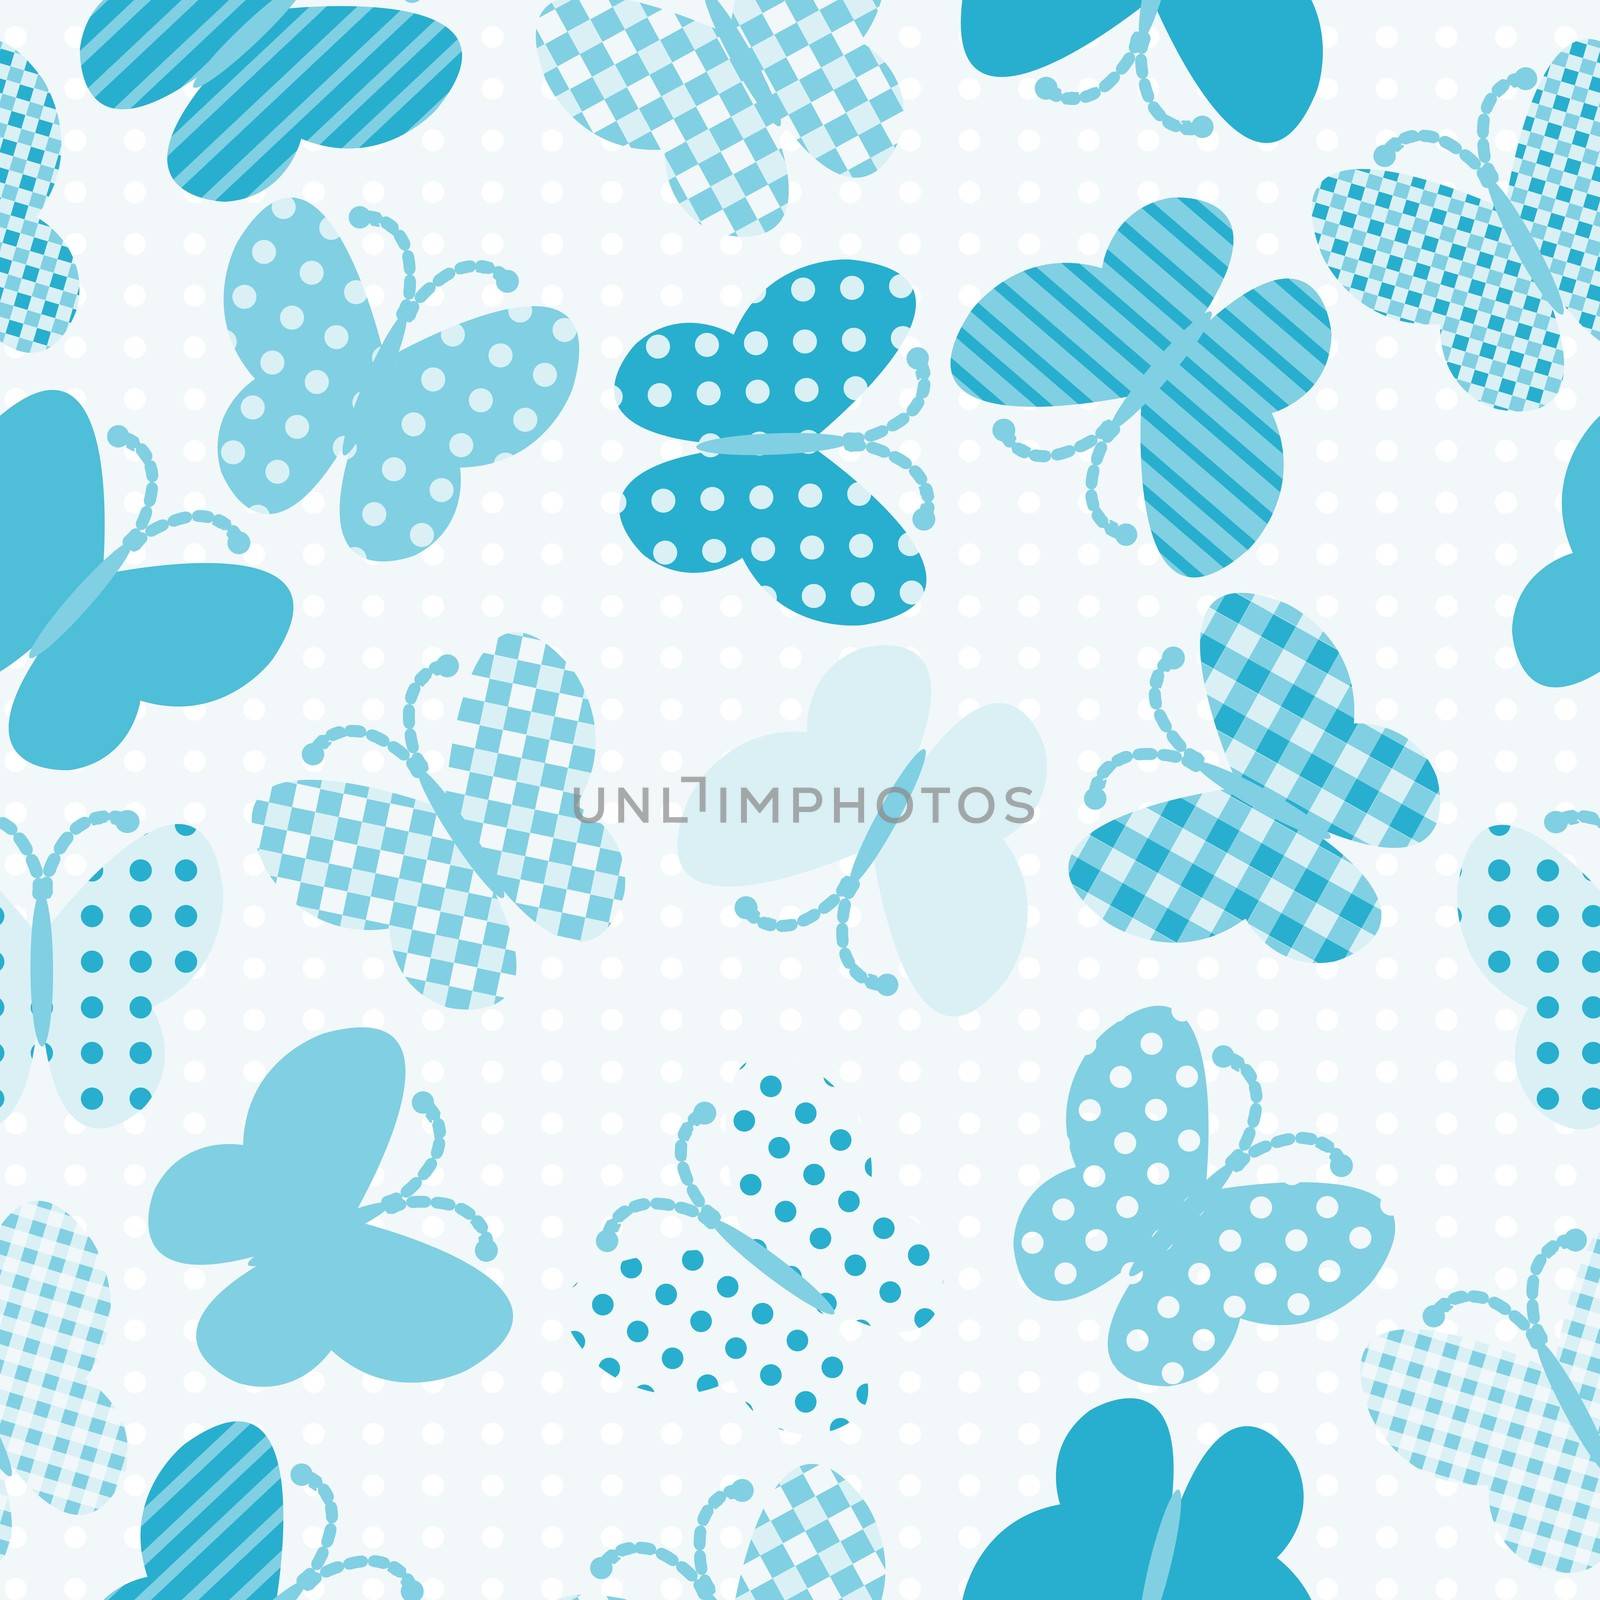 Blue patterned butterflies seamless by hibrida13